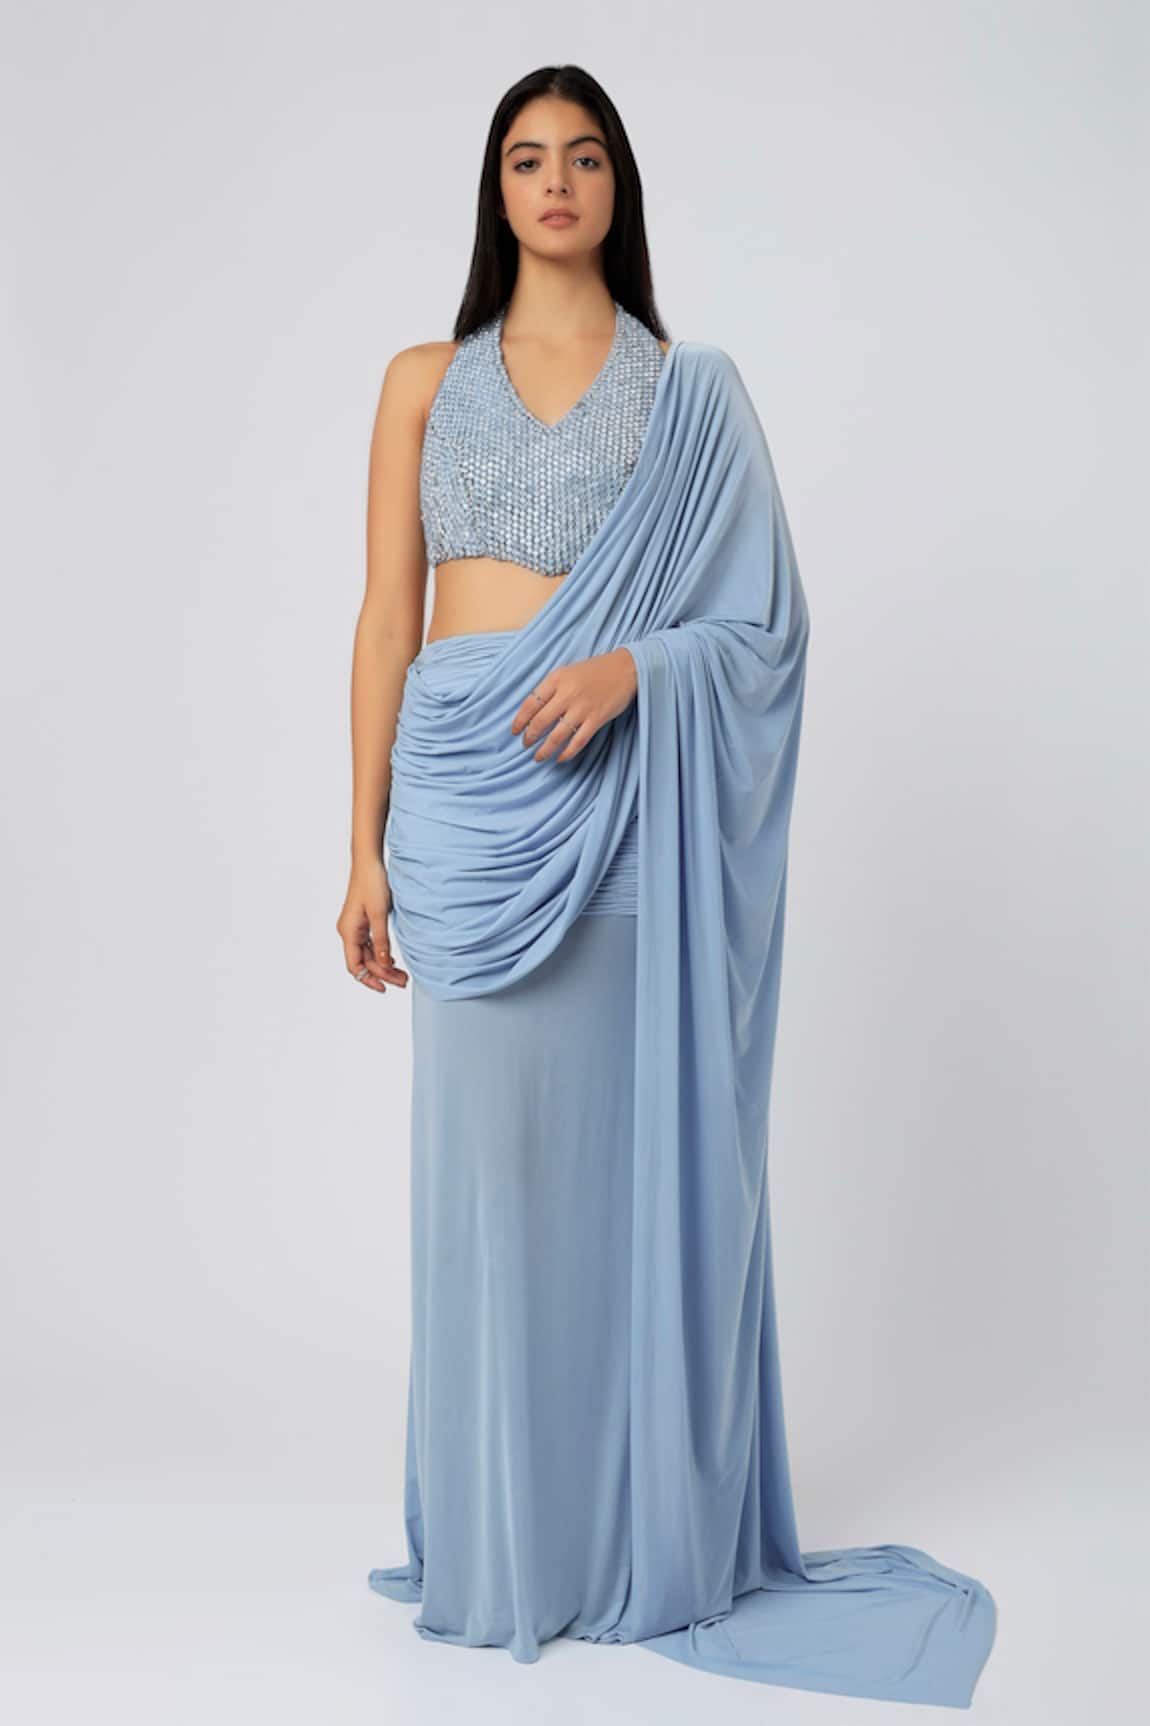 Deme by Gabriella Pleated Skirt Saree With Halter Neck Blouse